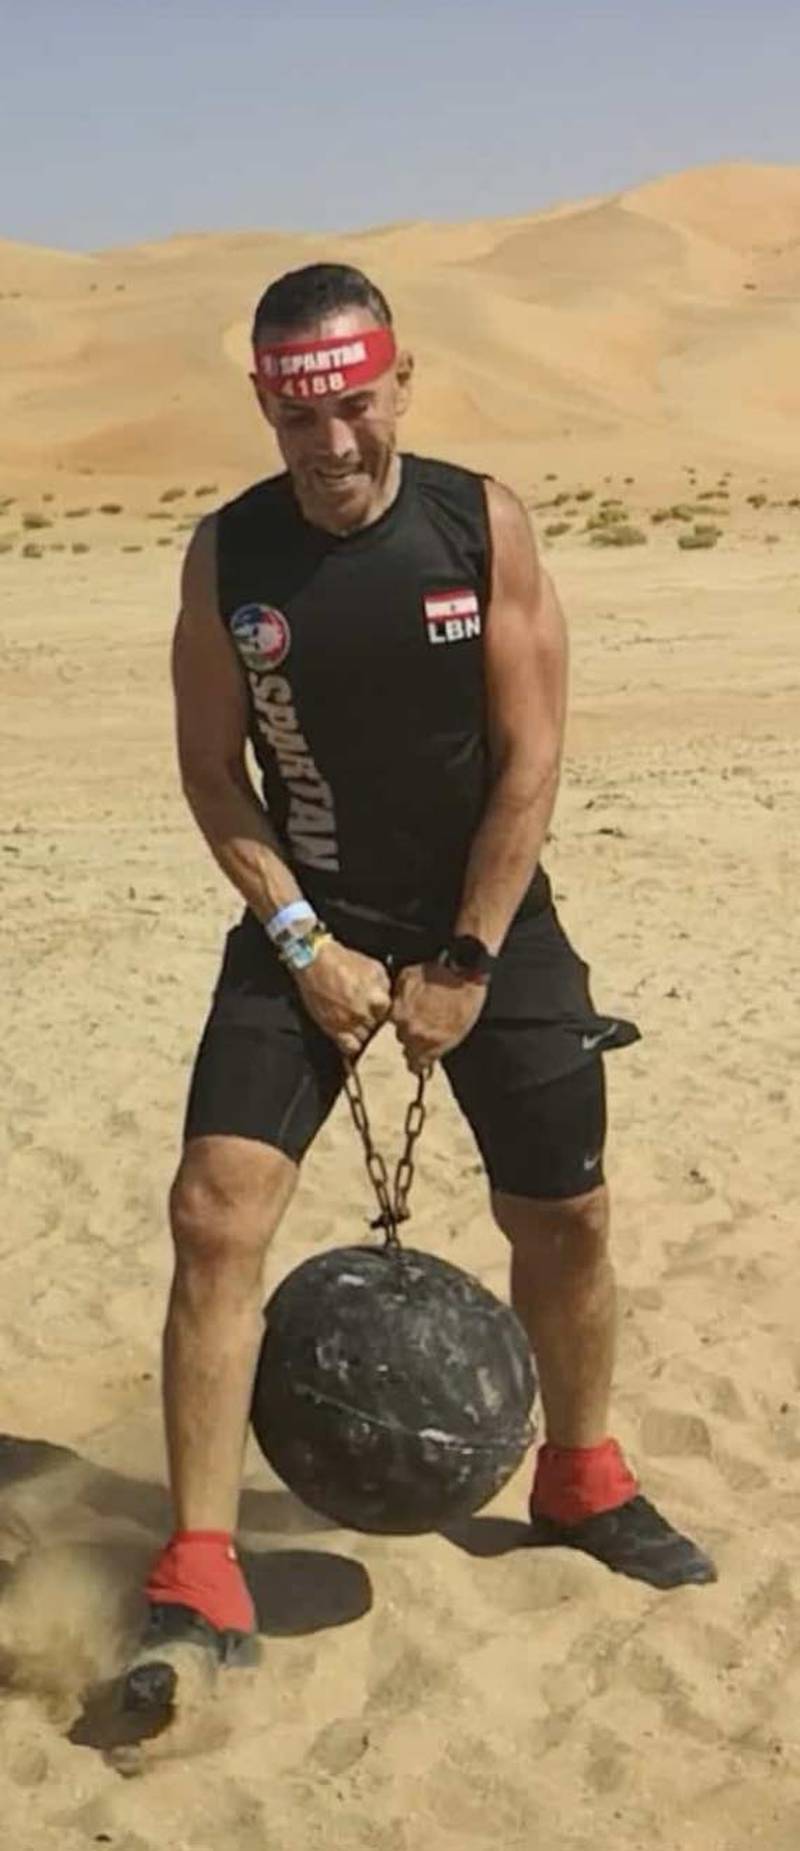 Lebanese racer Simon Khayat has incorporated weekly strength and obstacle training sessions in his prep. 